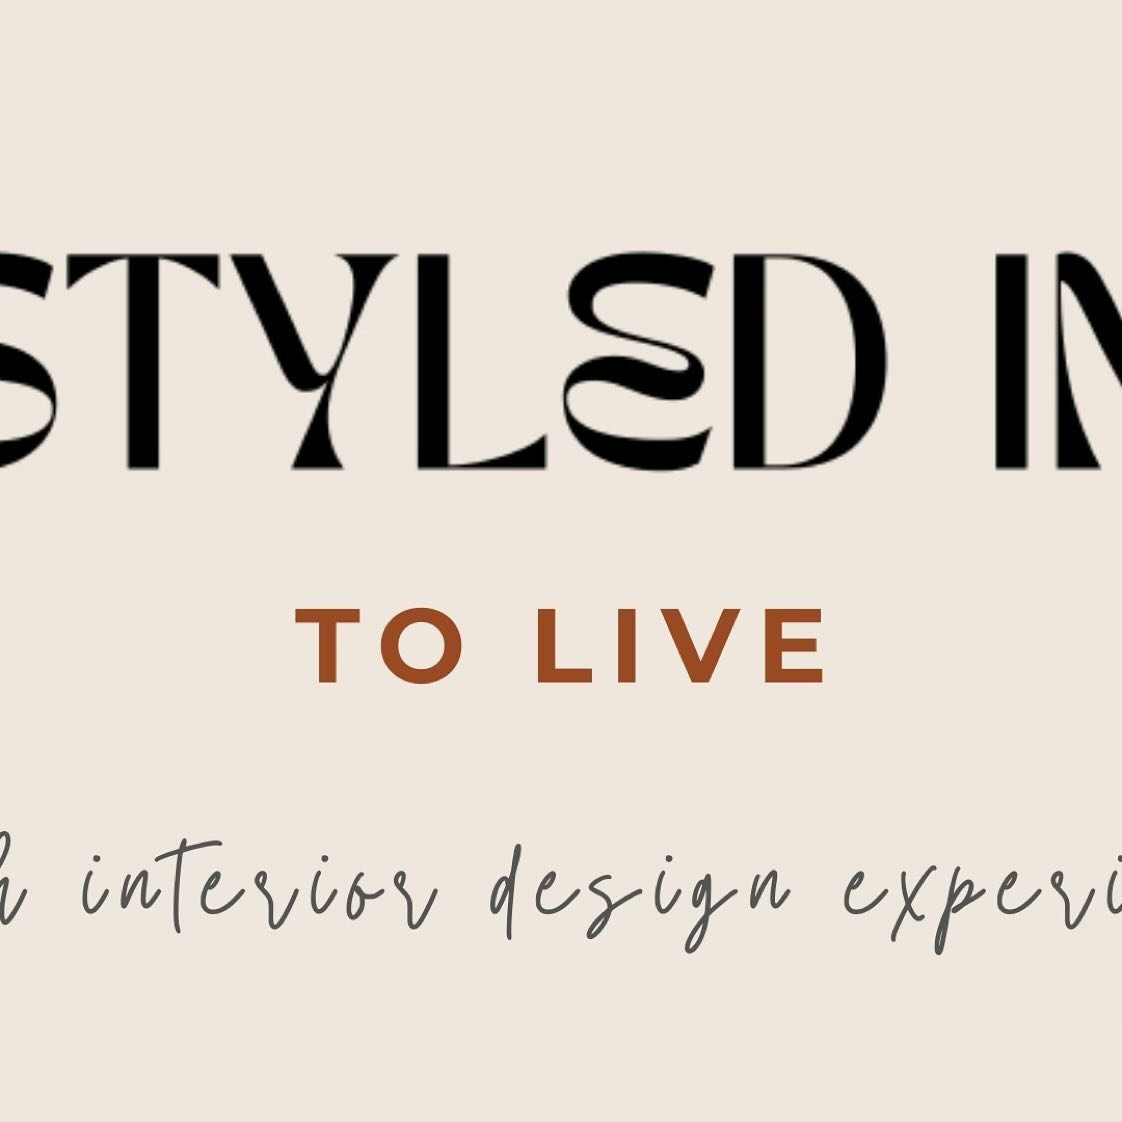 S T Y L E D  I N  T O  L I V E
👉🏾 helping you find your home and either renovate or design build, we are there from the initial home search, through closing and during move in
👉🏾 swipe right to see what our offerings are and how we as interior de